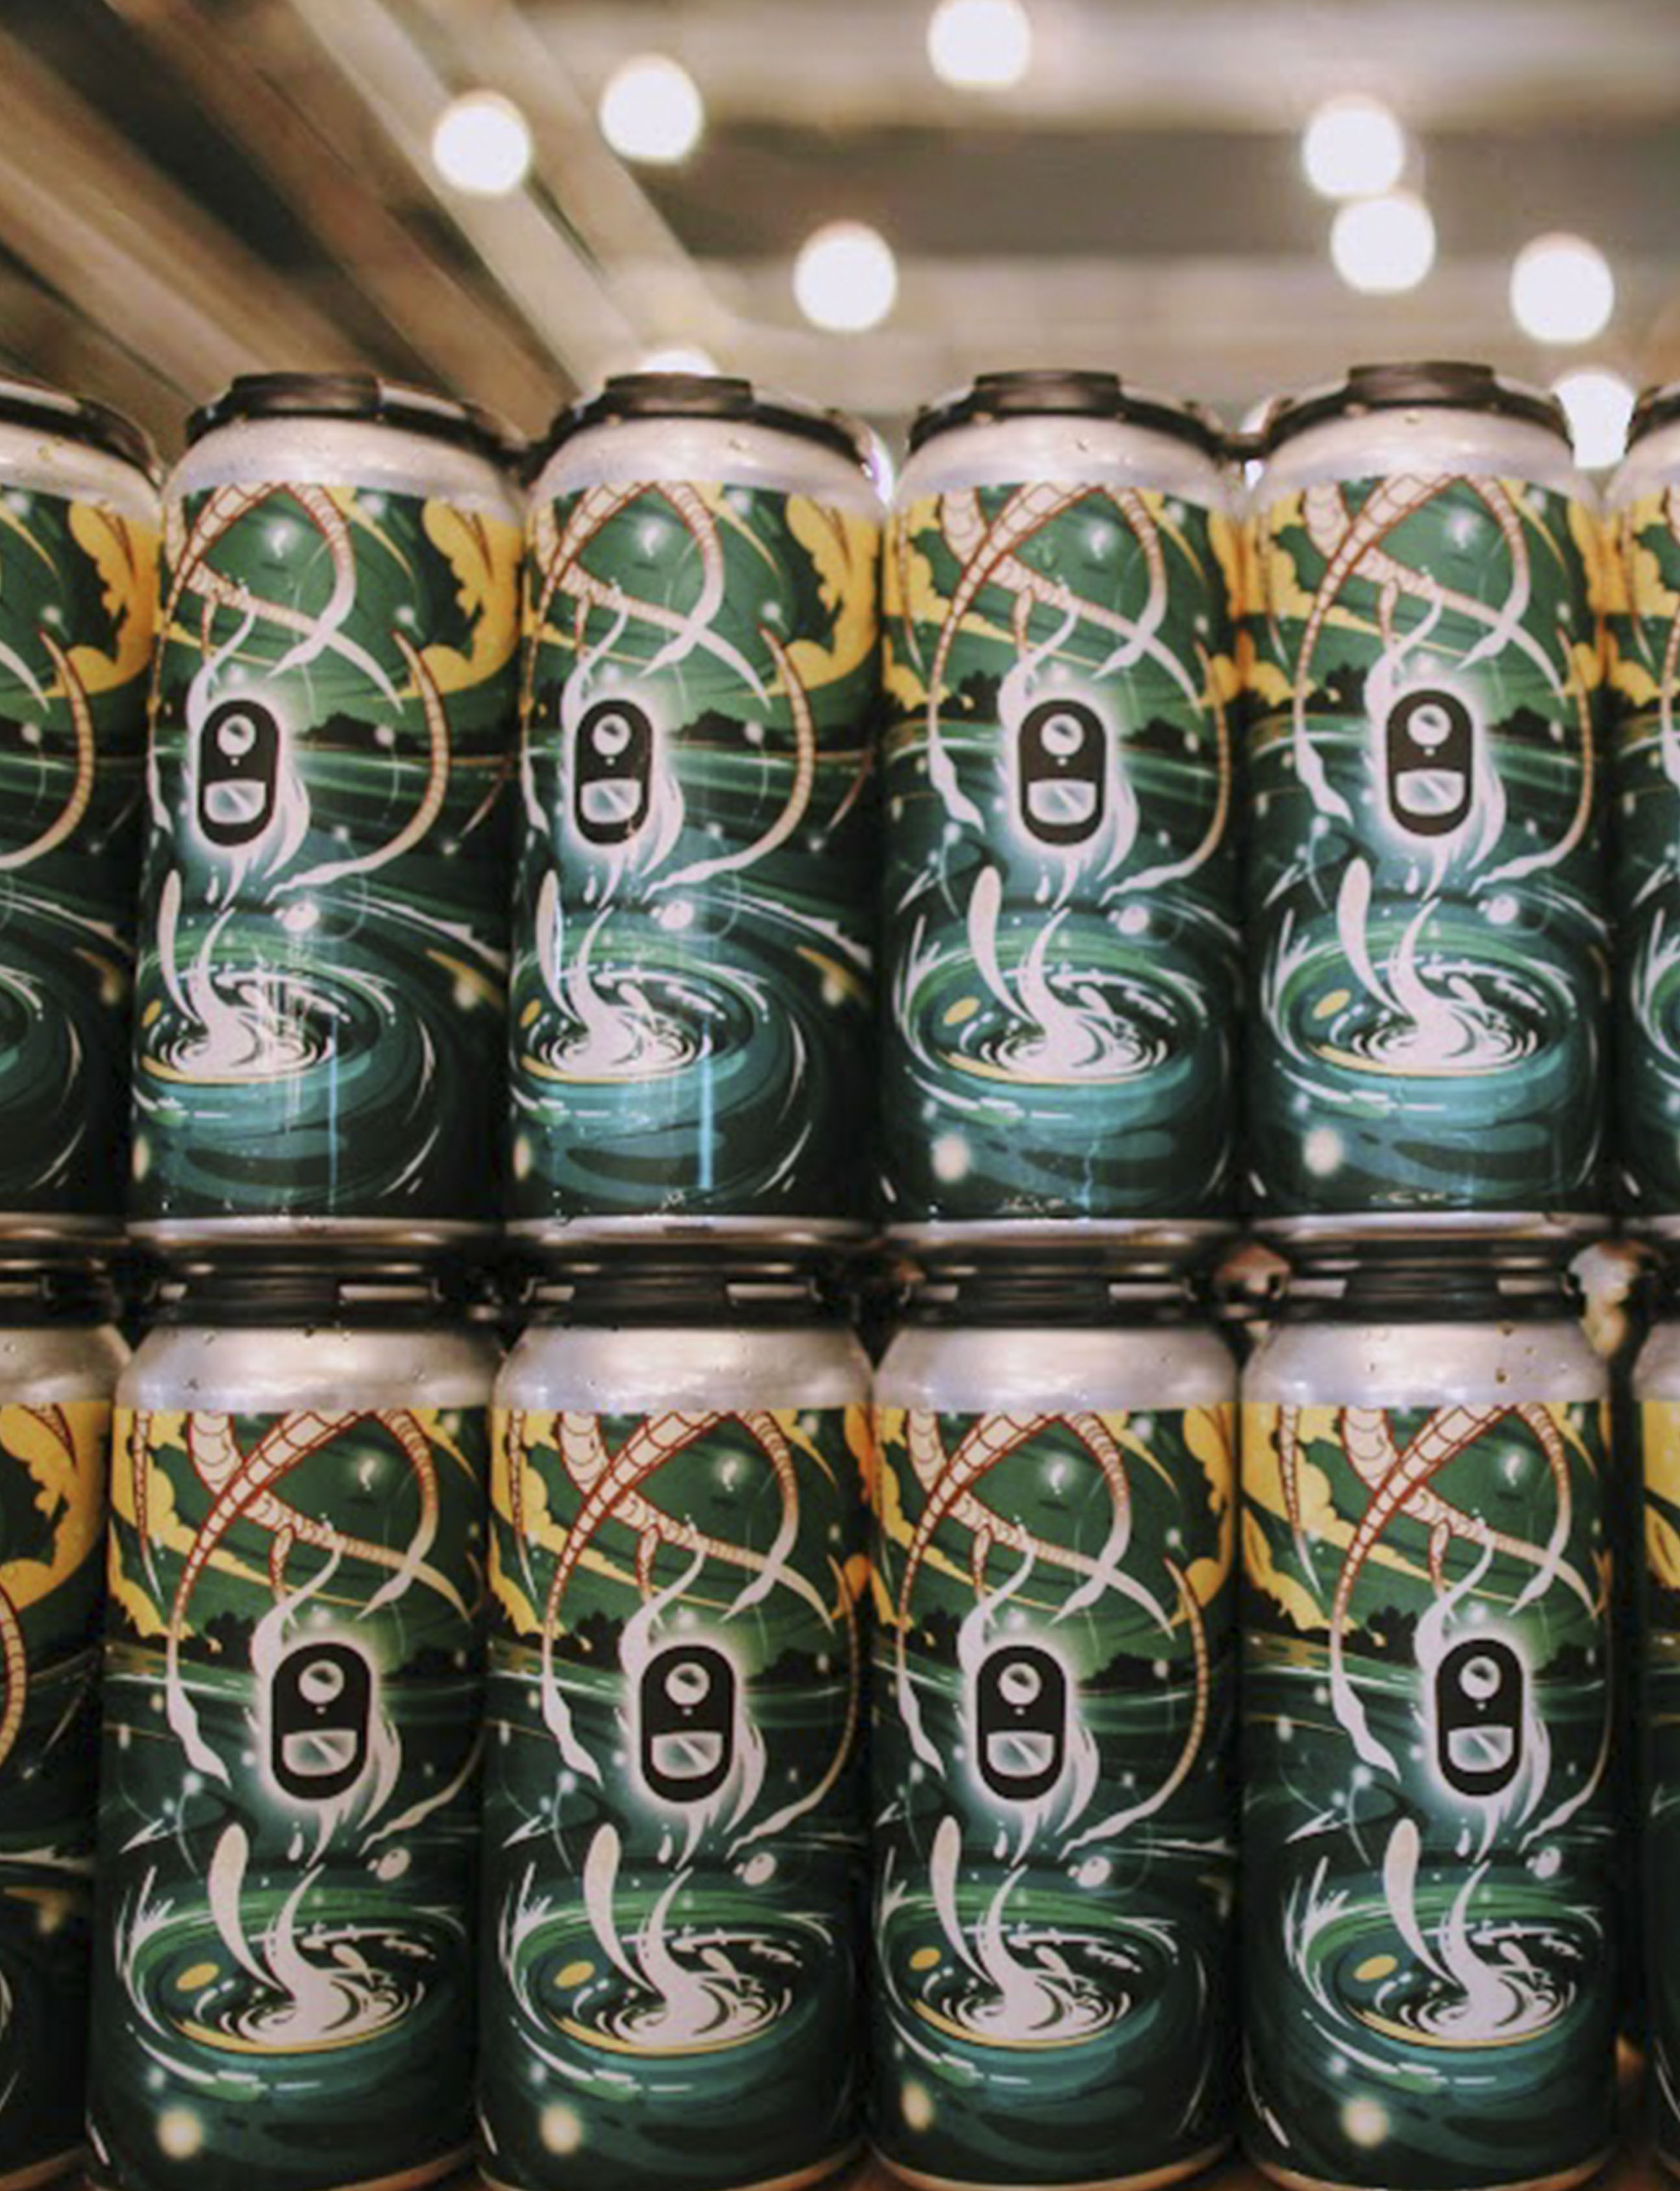 Printed and canned beer